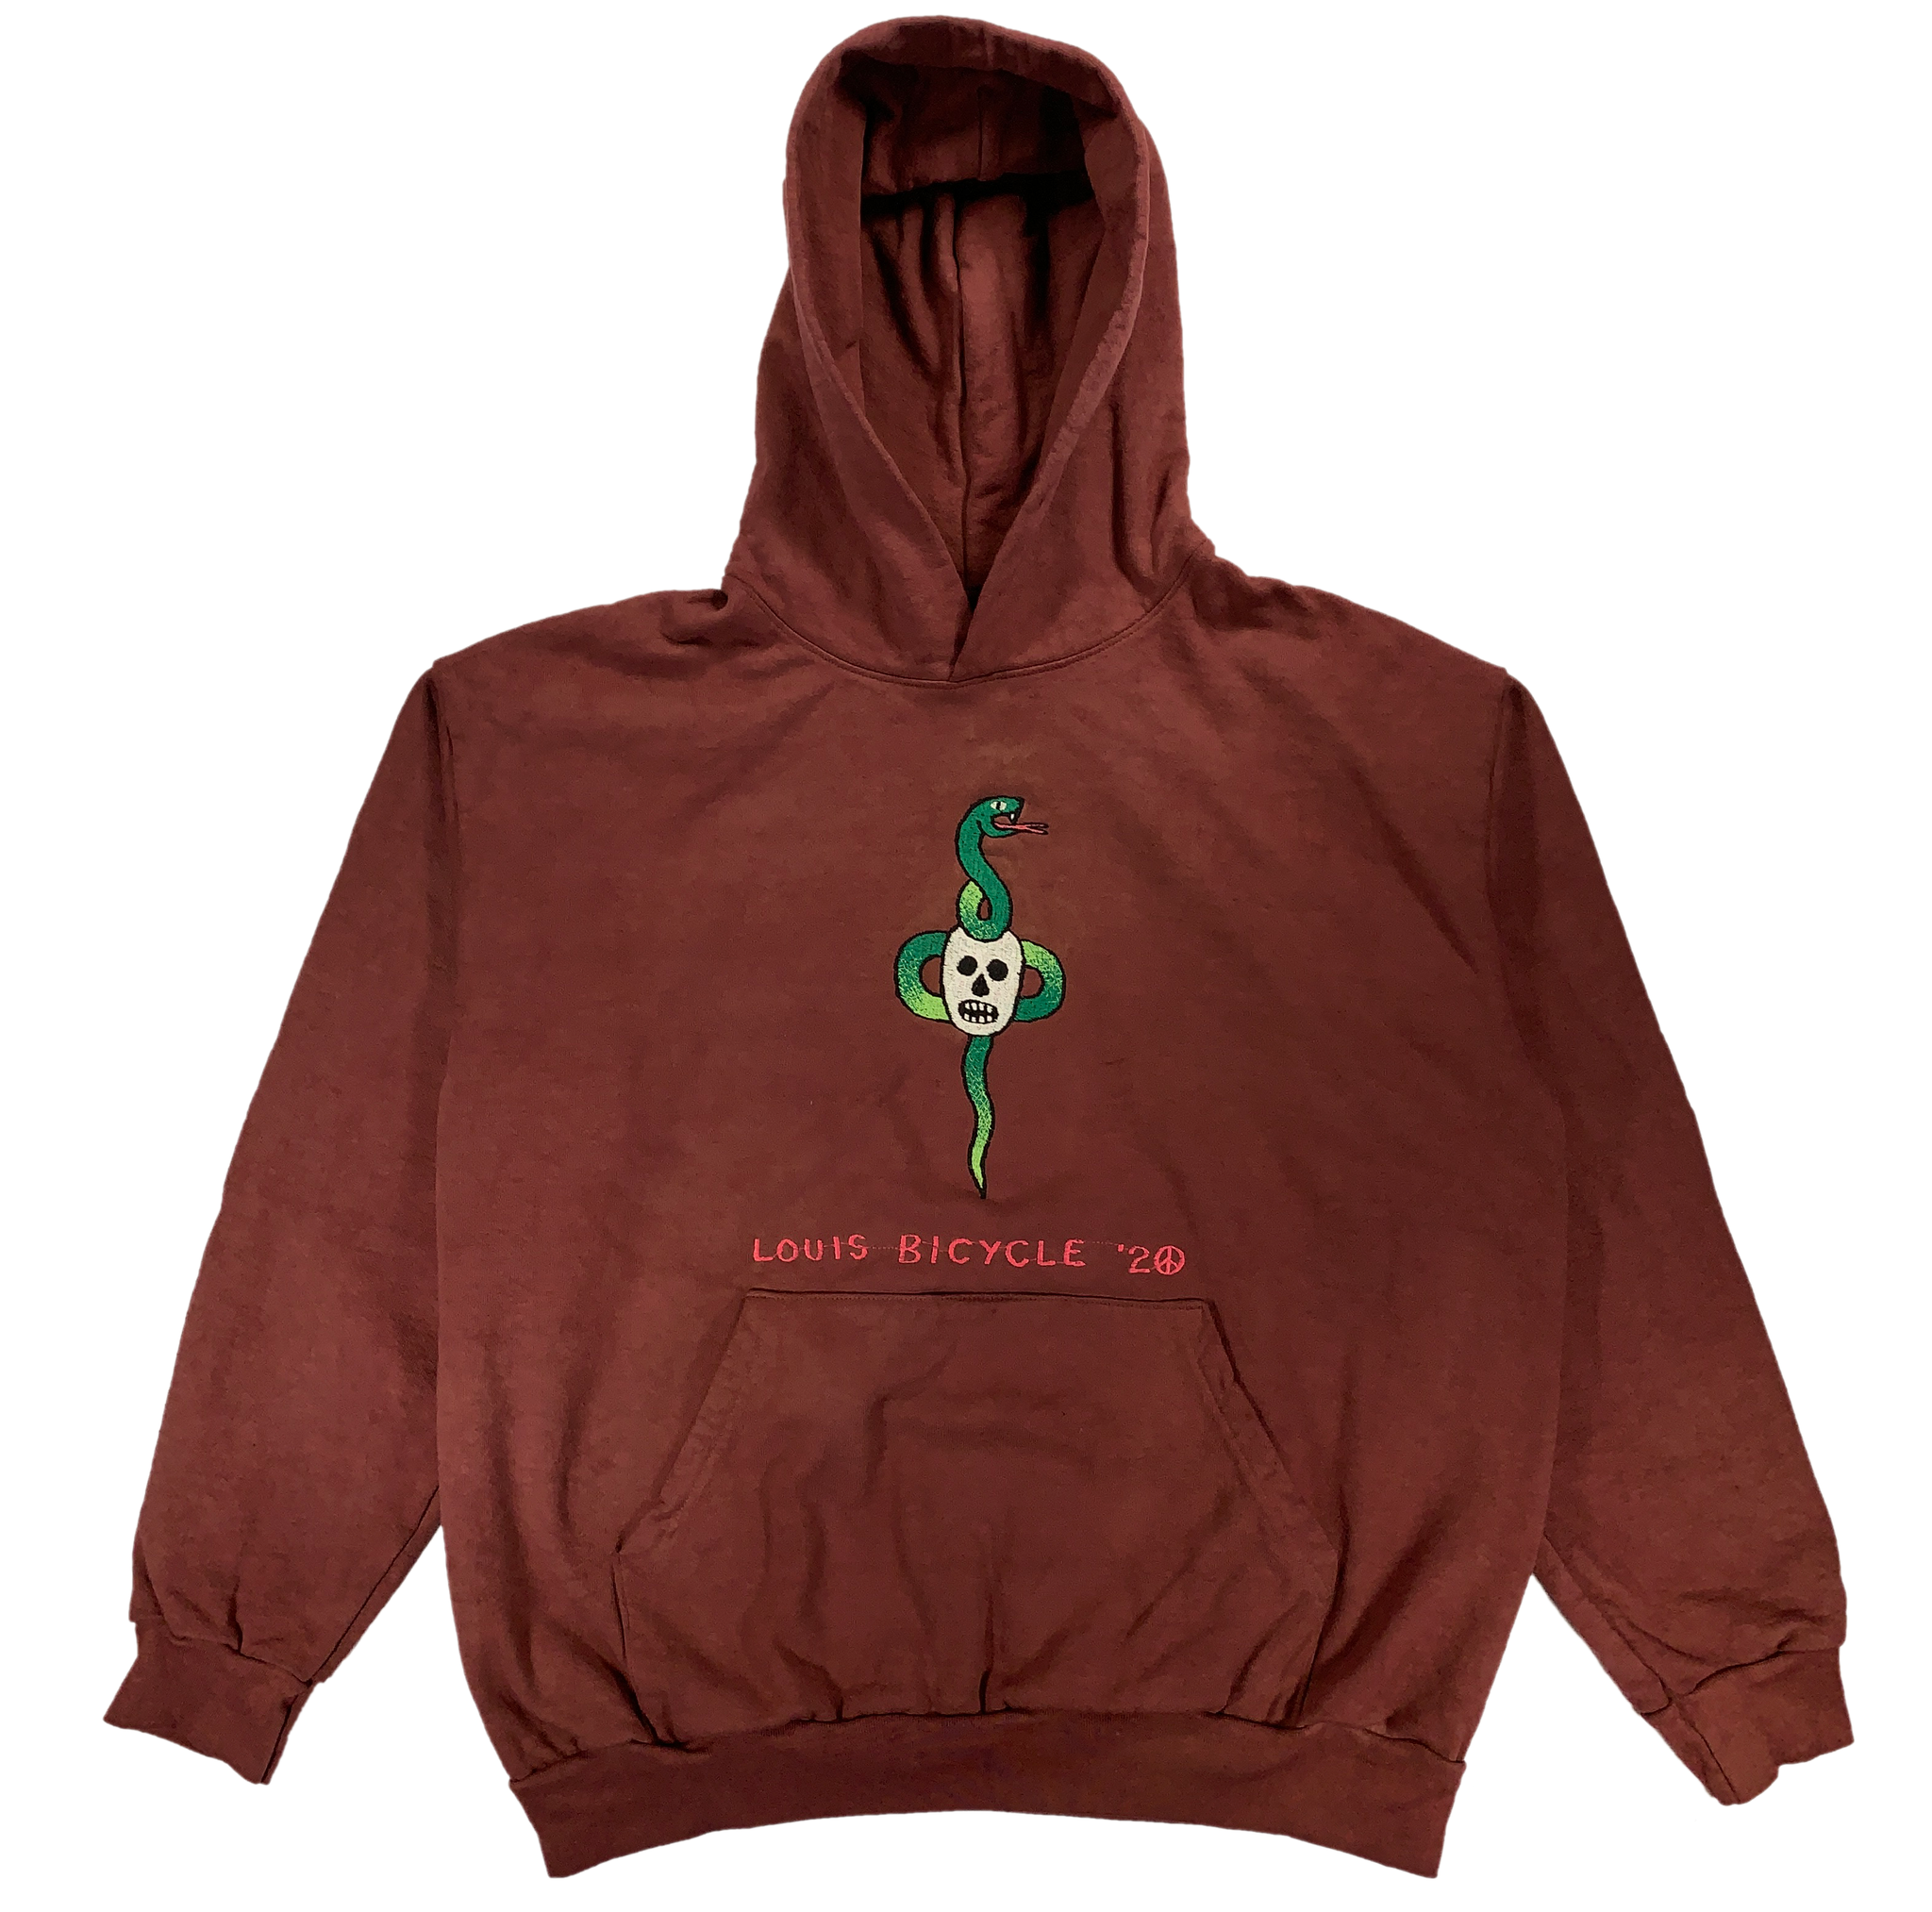 Embroidered and Dyed Hoodie - XL